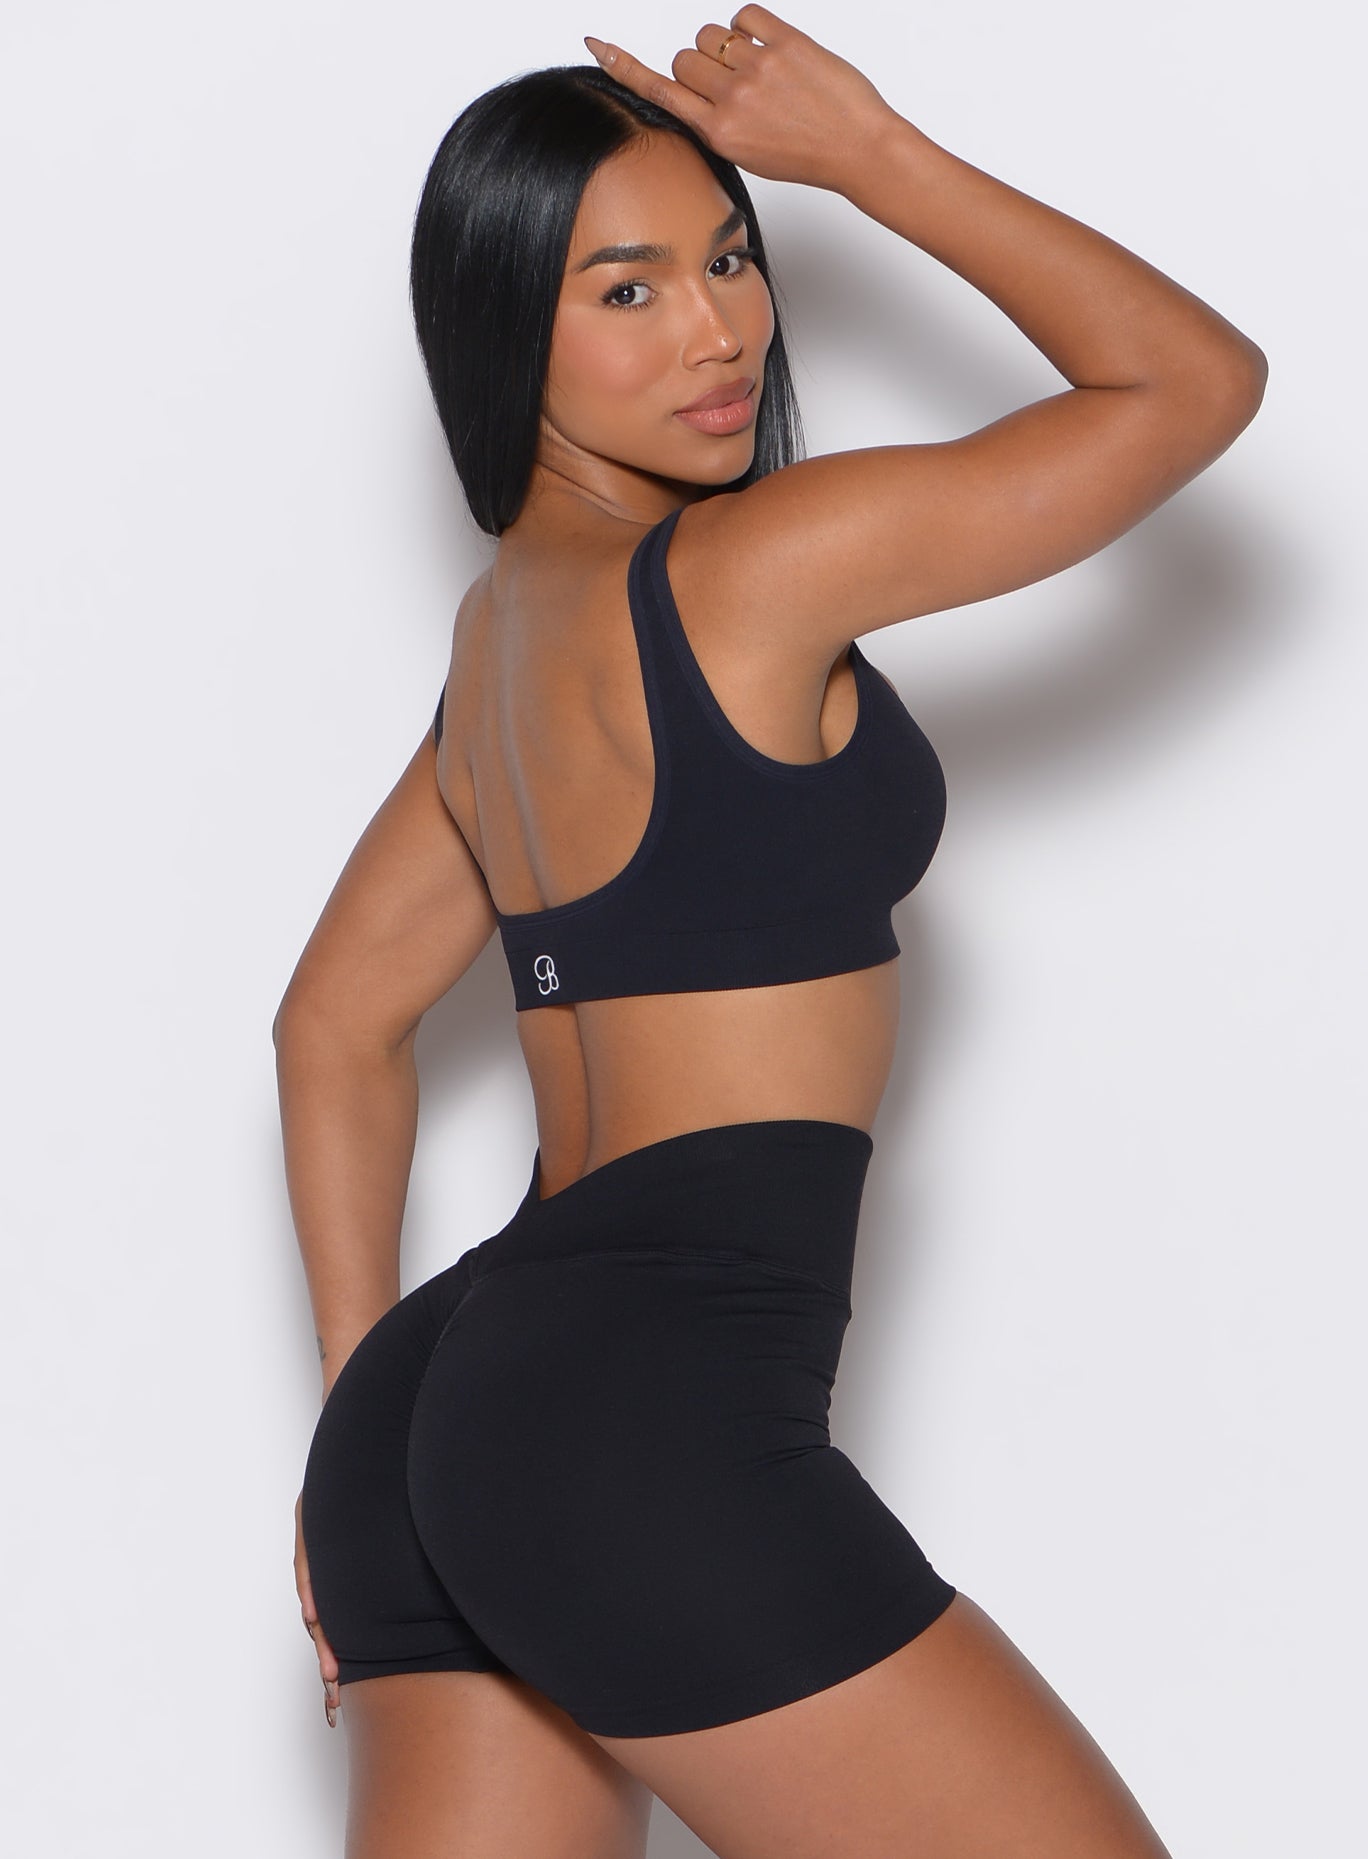 Right side profile view of a model wearing our black square neck bra along with the matching shorts